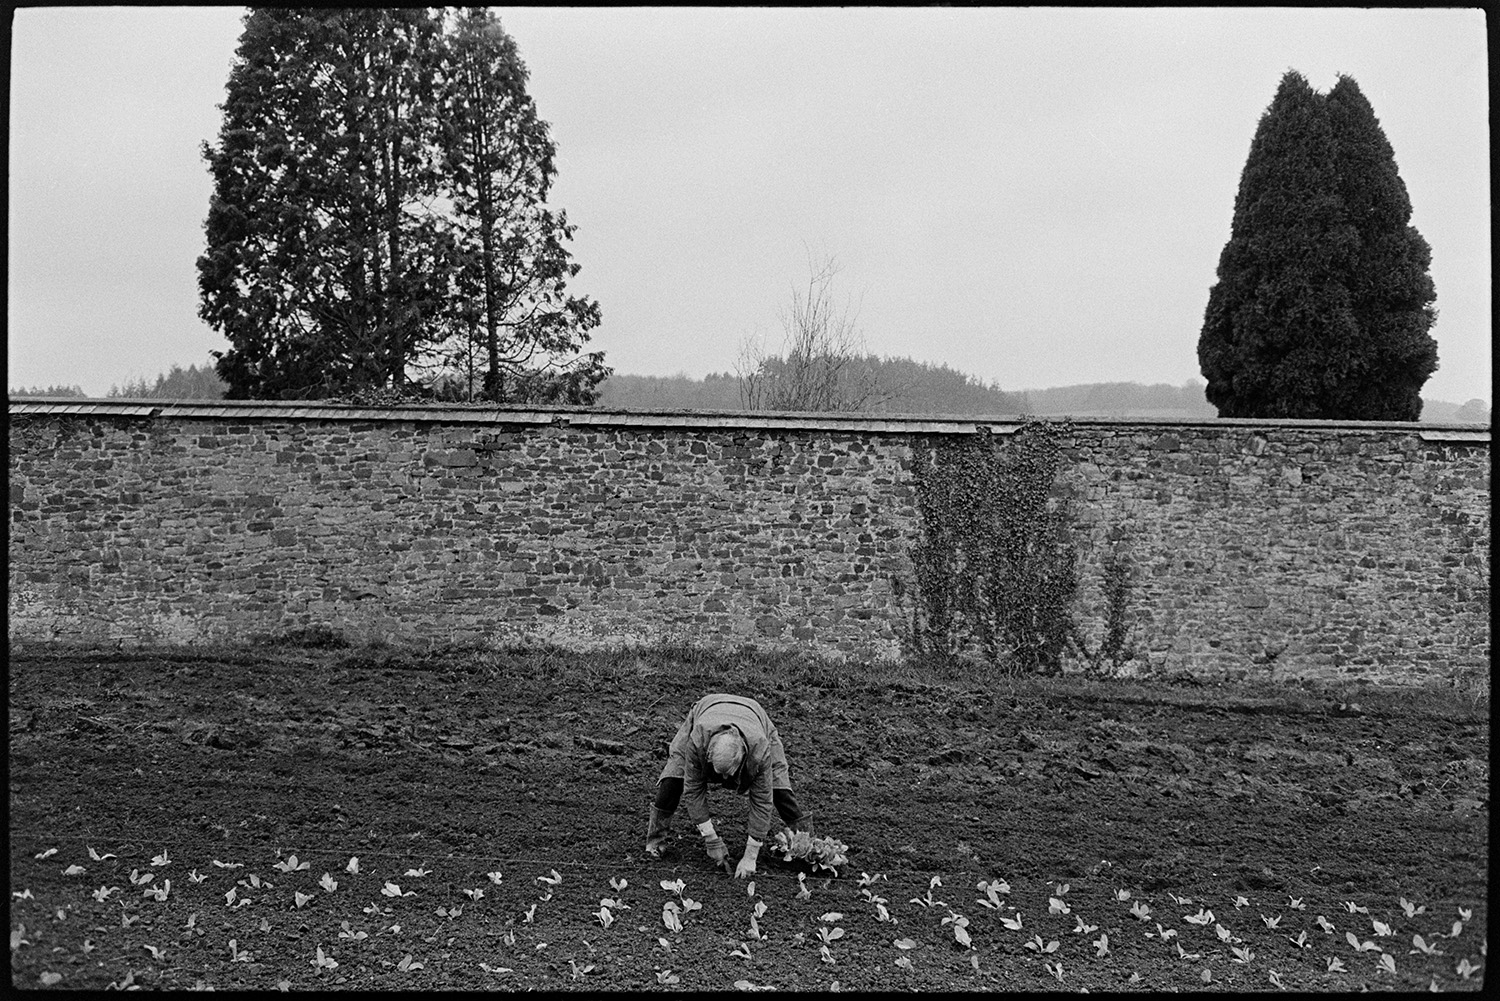 Man planting lettuces at walled garden centre. 
[A man planting rows of lettuces in a walled garden at Eggesford Garden Centre. Trees can be seen in the background behind the wall.]